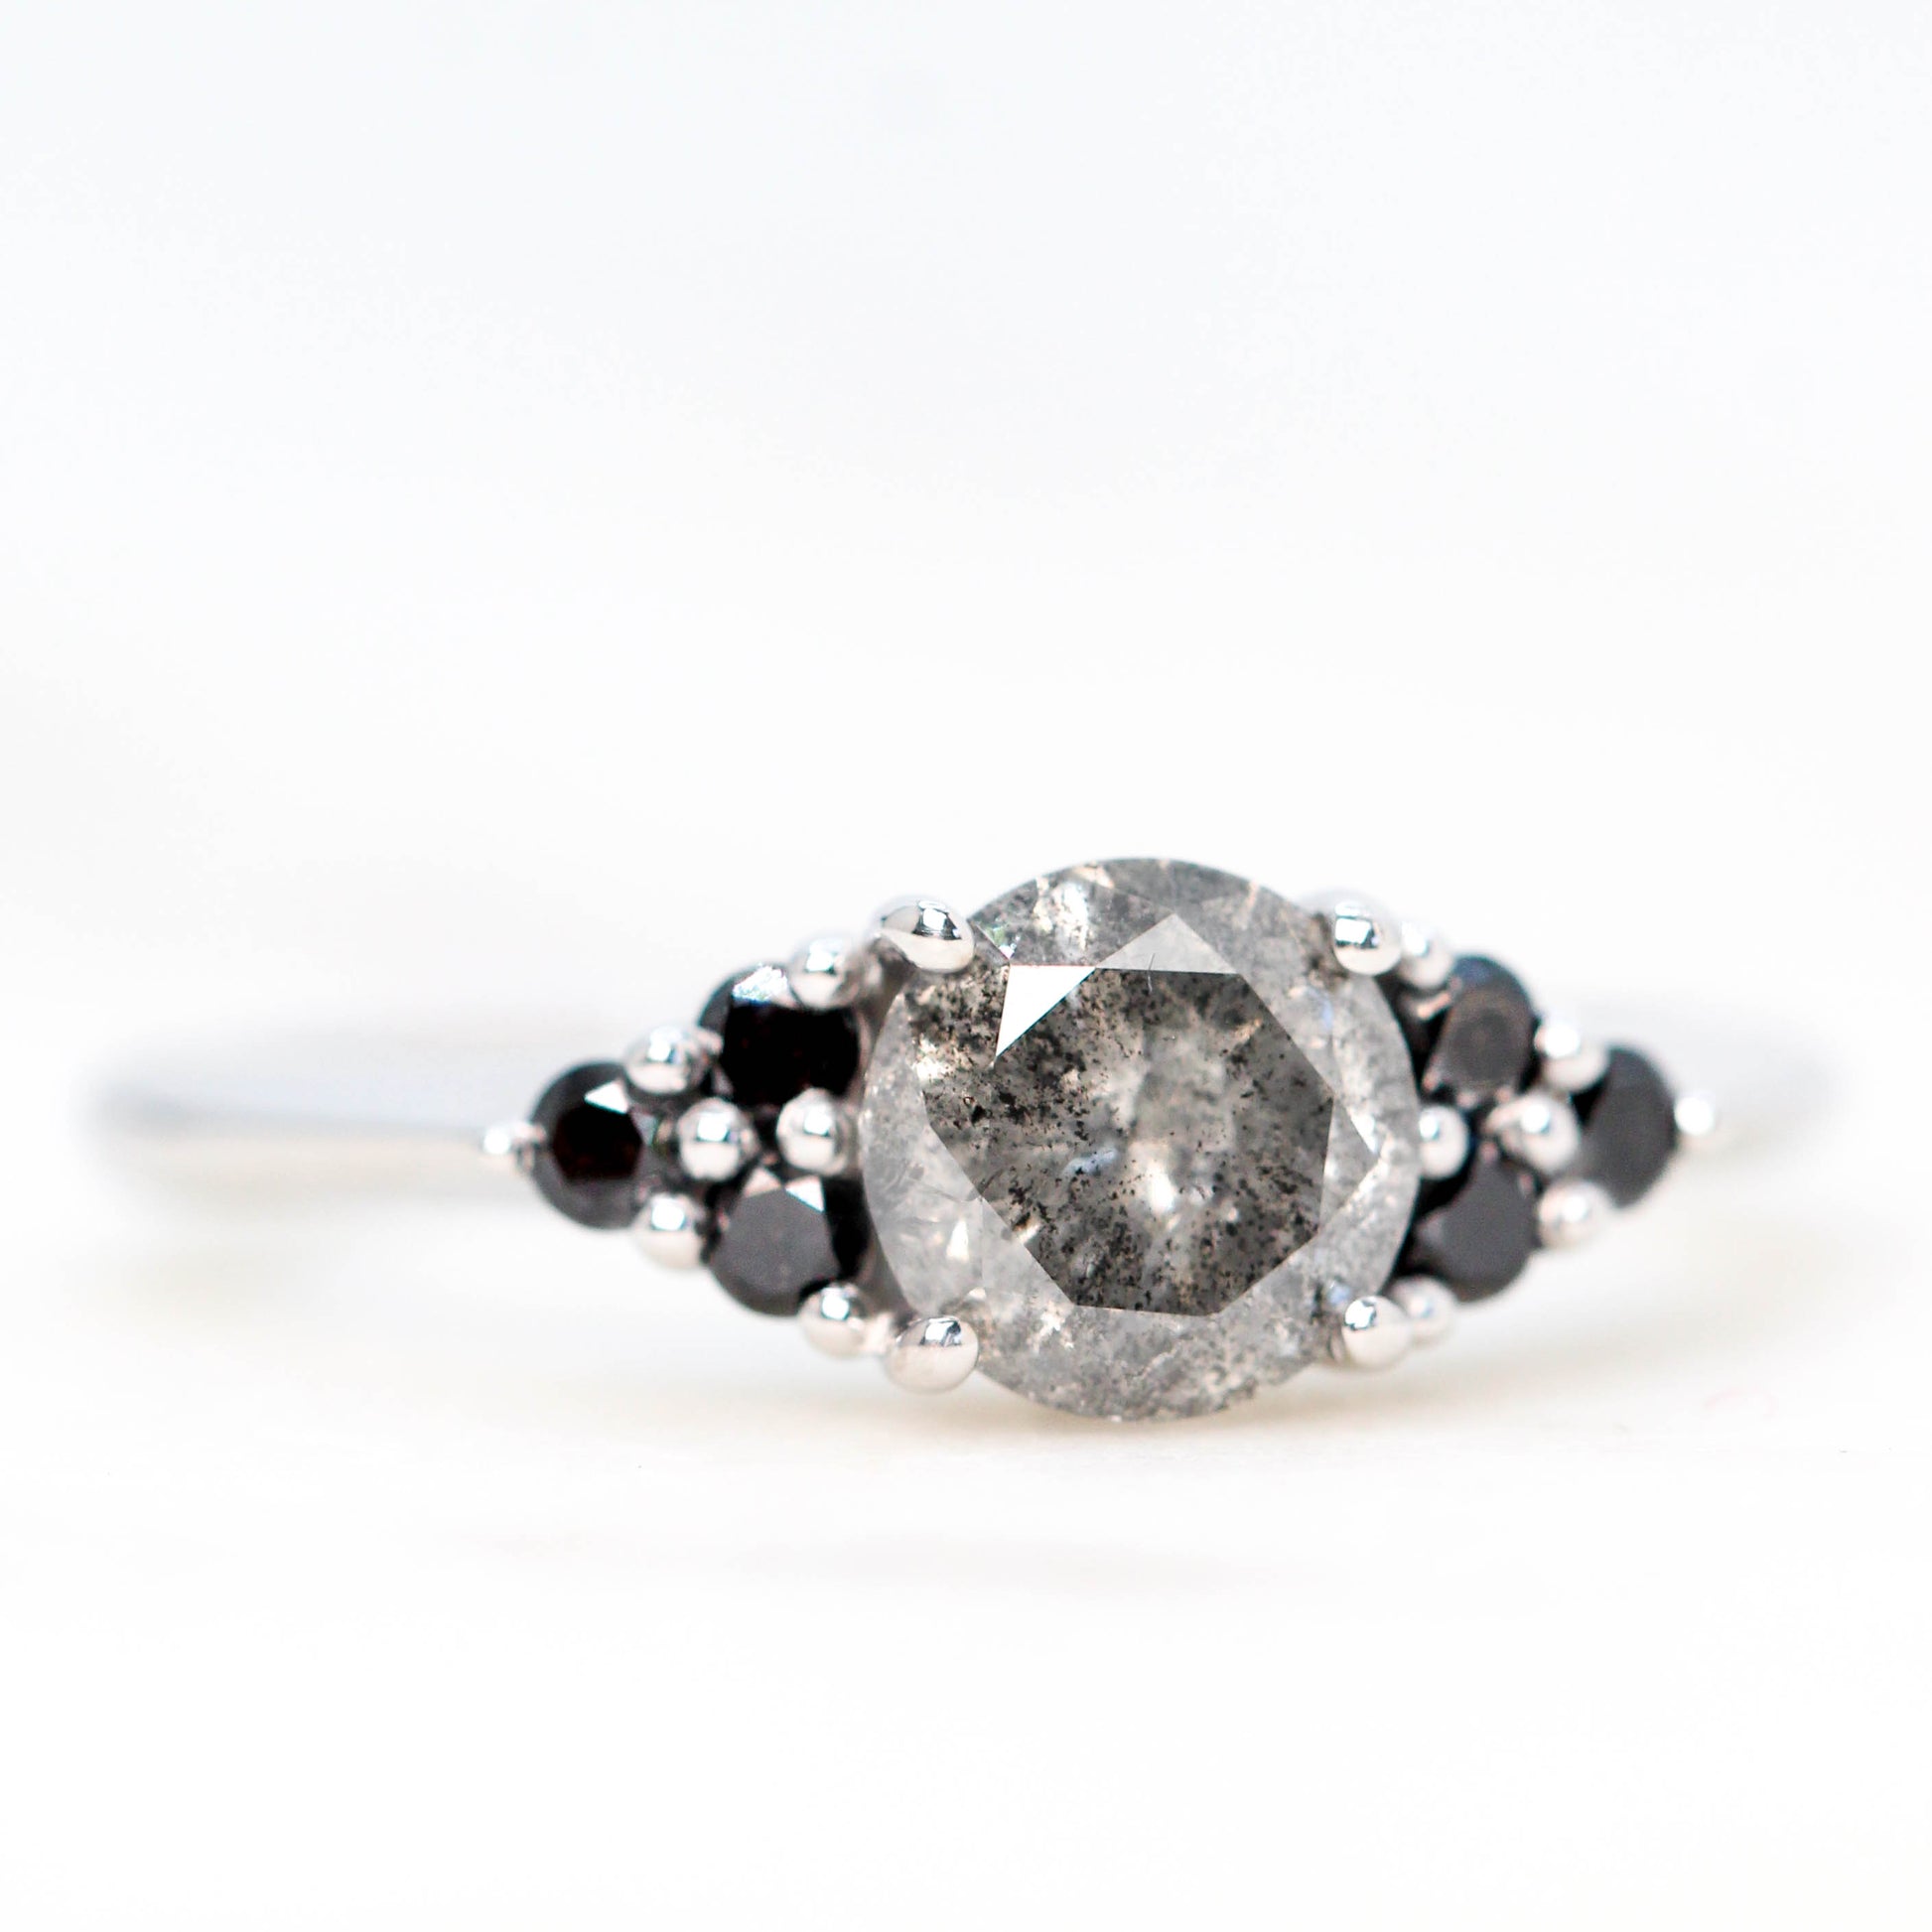 Aster Ring with a 1.10 Carat Dark Gray Round Diamond and Black Accent Diamonds in 14k White Gold - Ready to Size and Ship - Midwinter Co. Alternative Bridal Rings and Modern Fine Jewelry